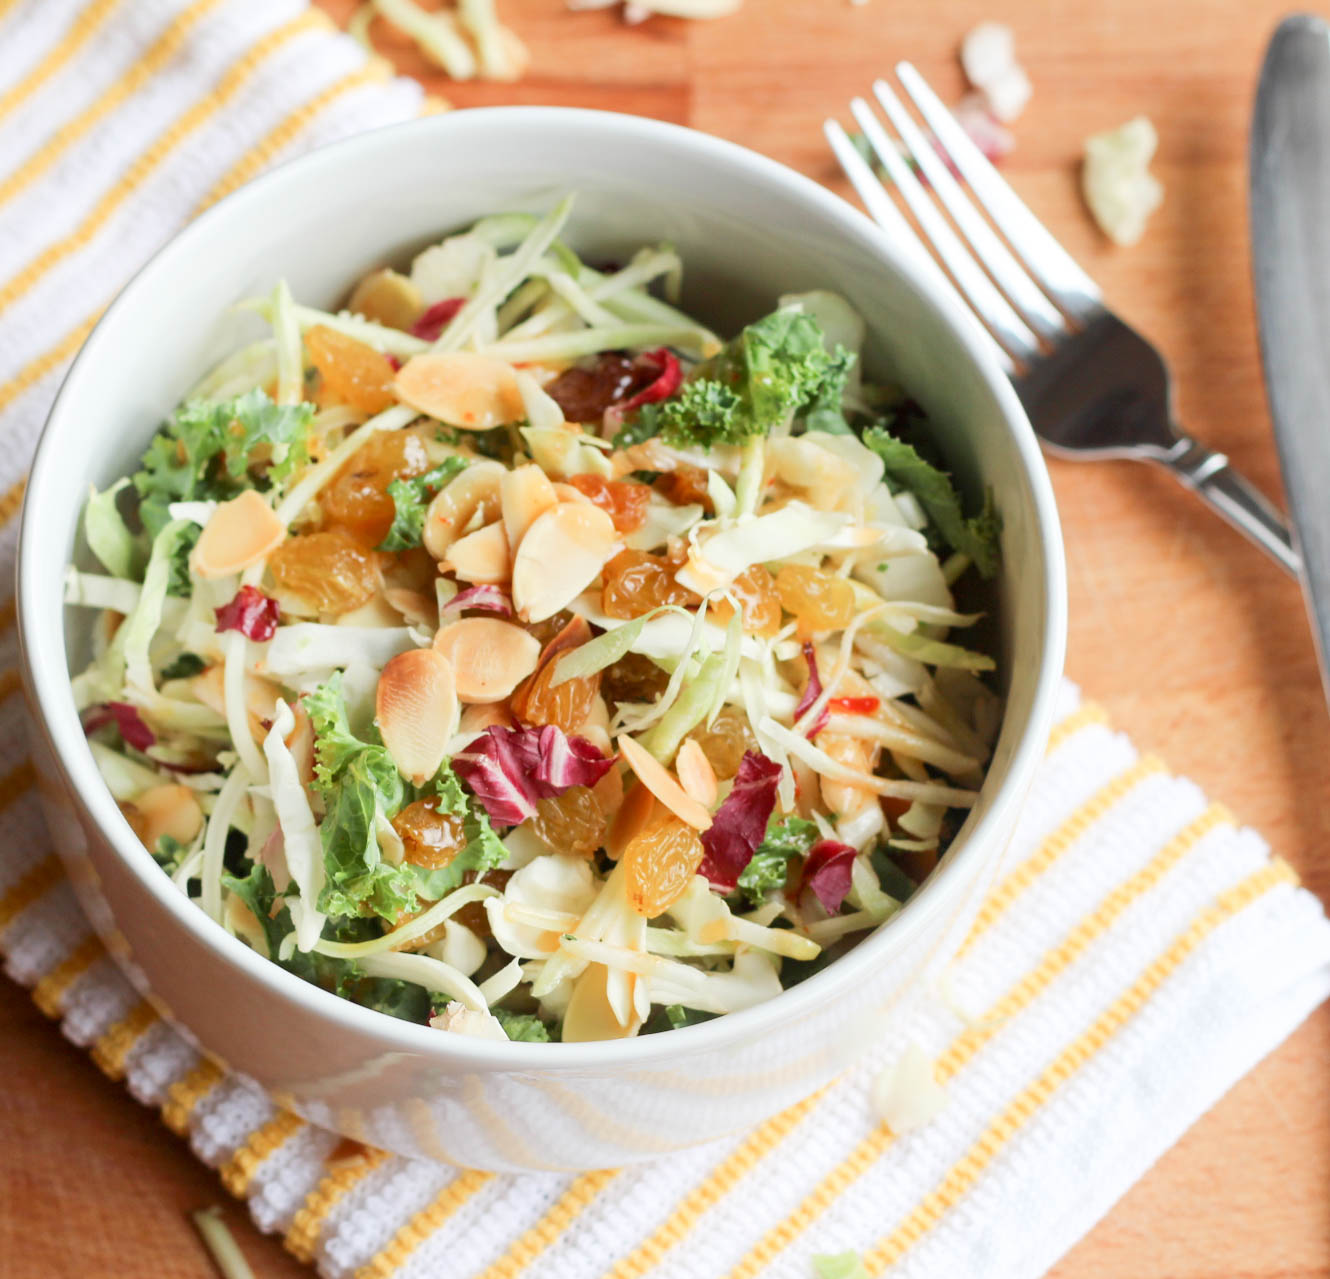 6 Tips For Dining Out - Healthy Salad